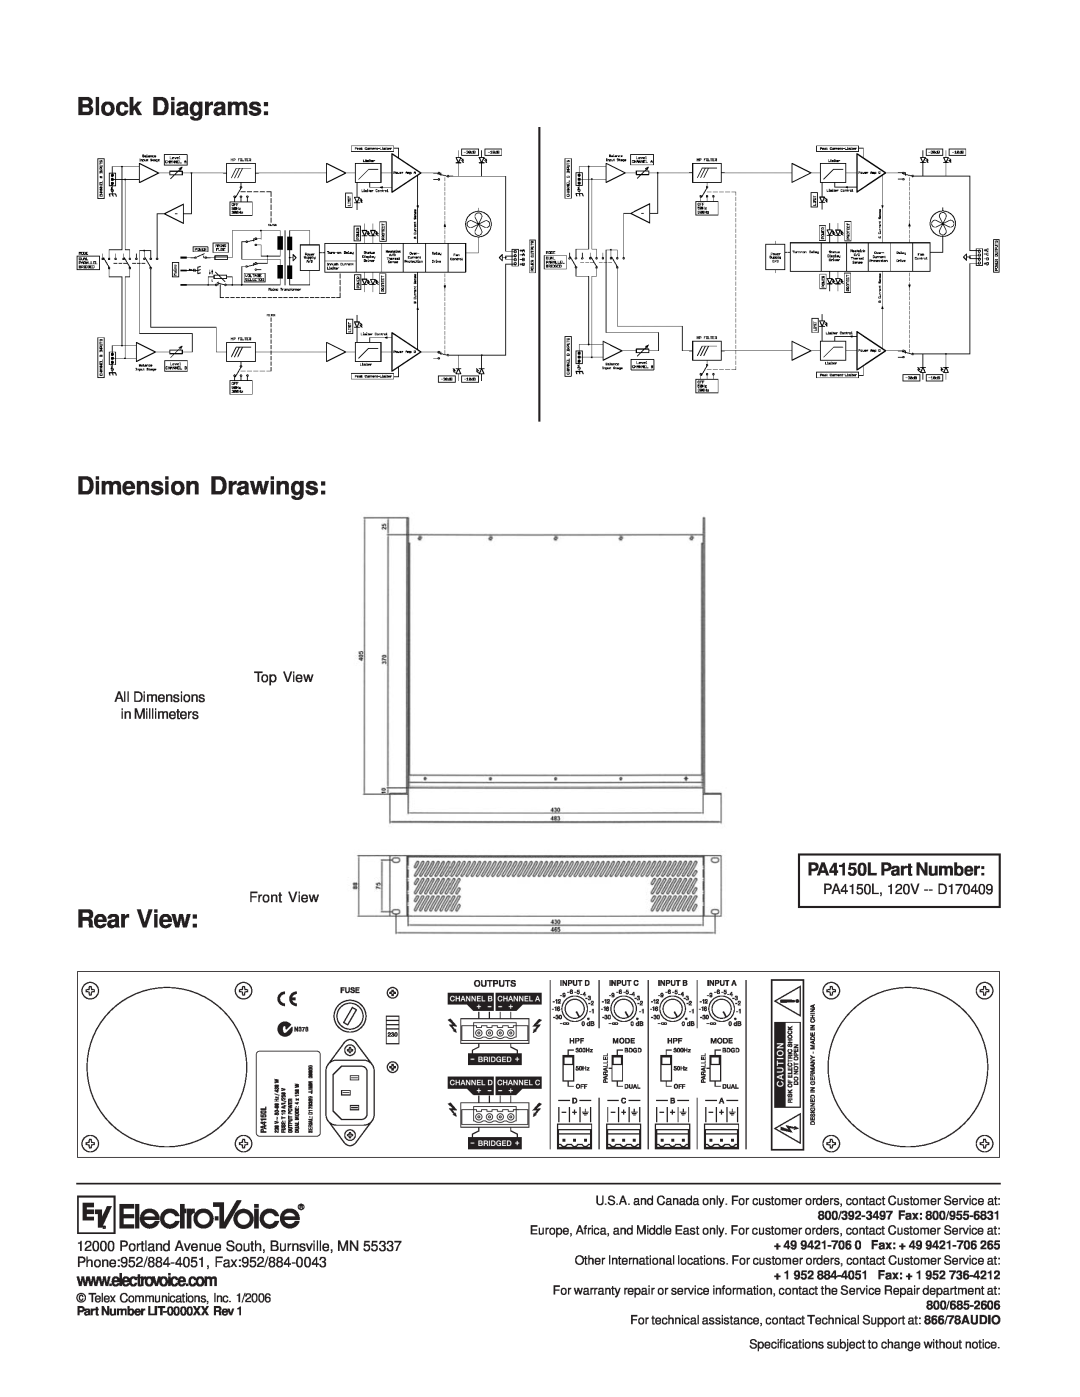 Electro-Voice Block Diagrams Dimension Drawings, Rear View, PA4150L Part Number, Telex Communications, Inc. 1/2006 